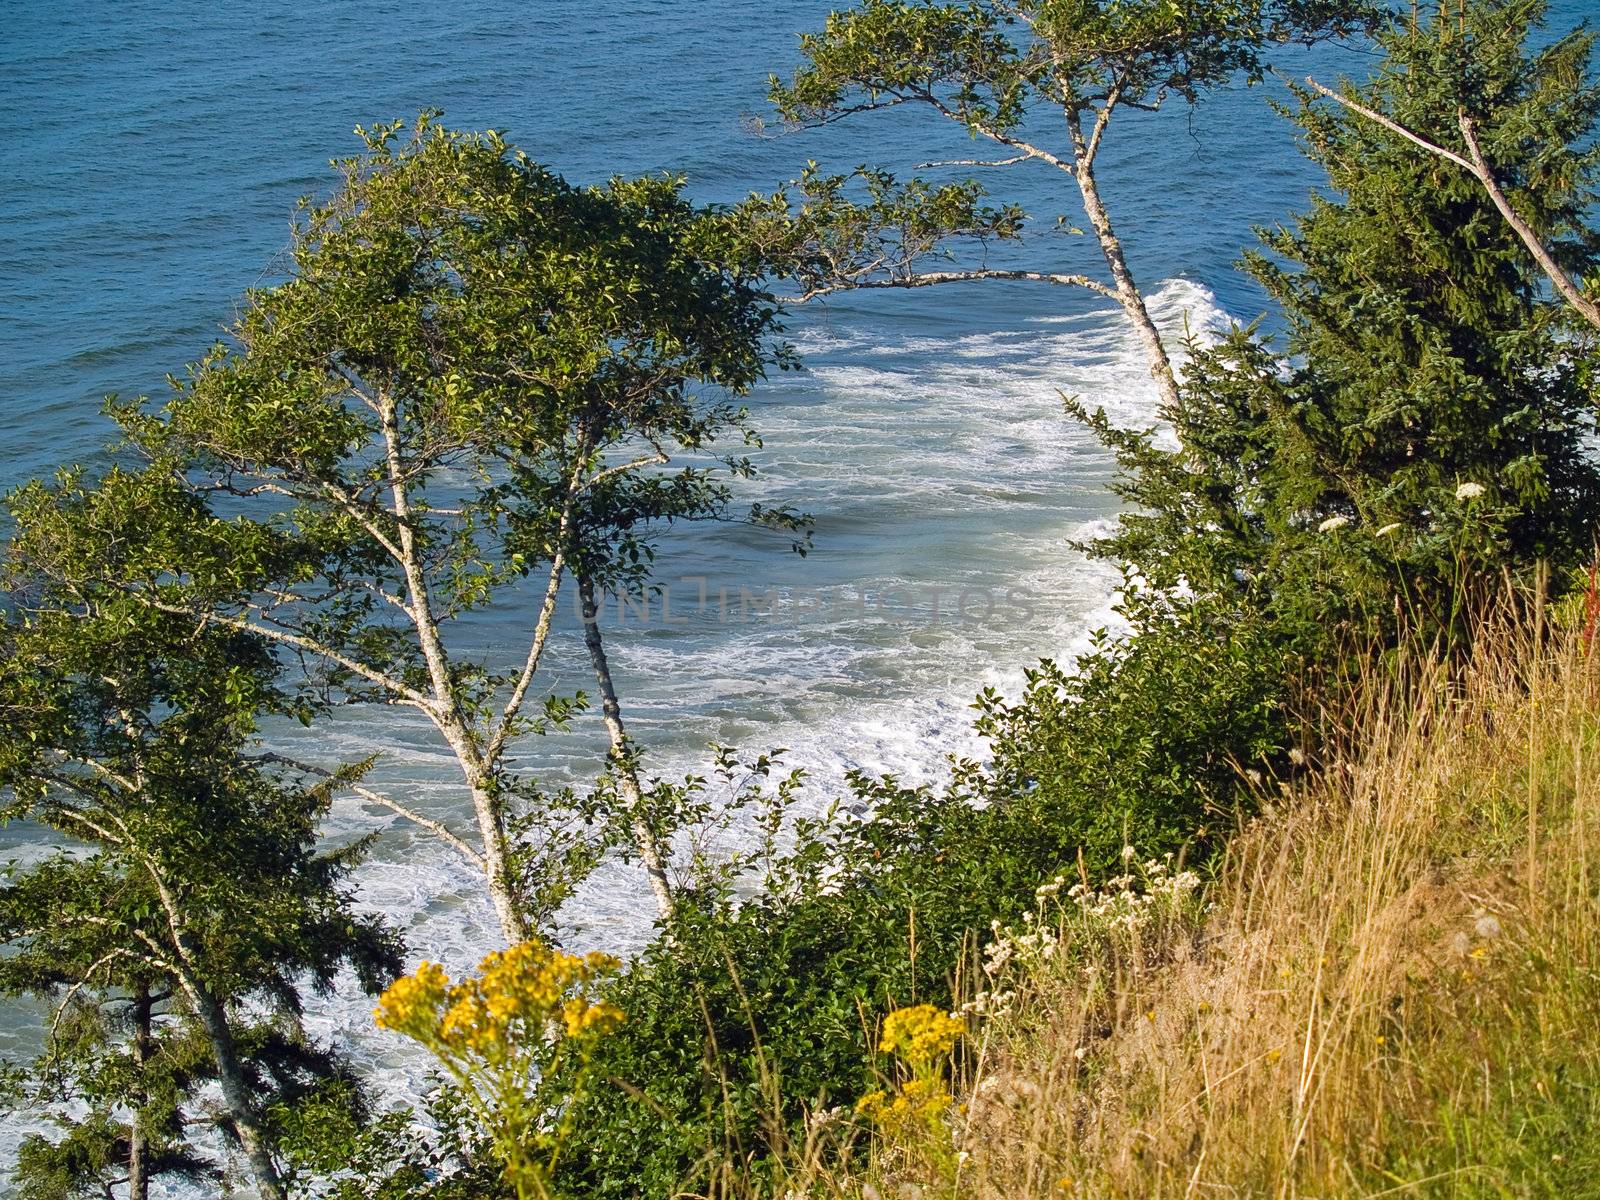 A view of the ocean from a cliff with trees and plants growing on the cliffside.